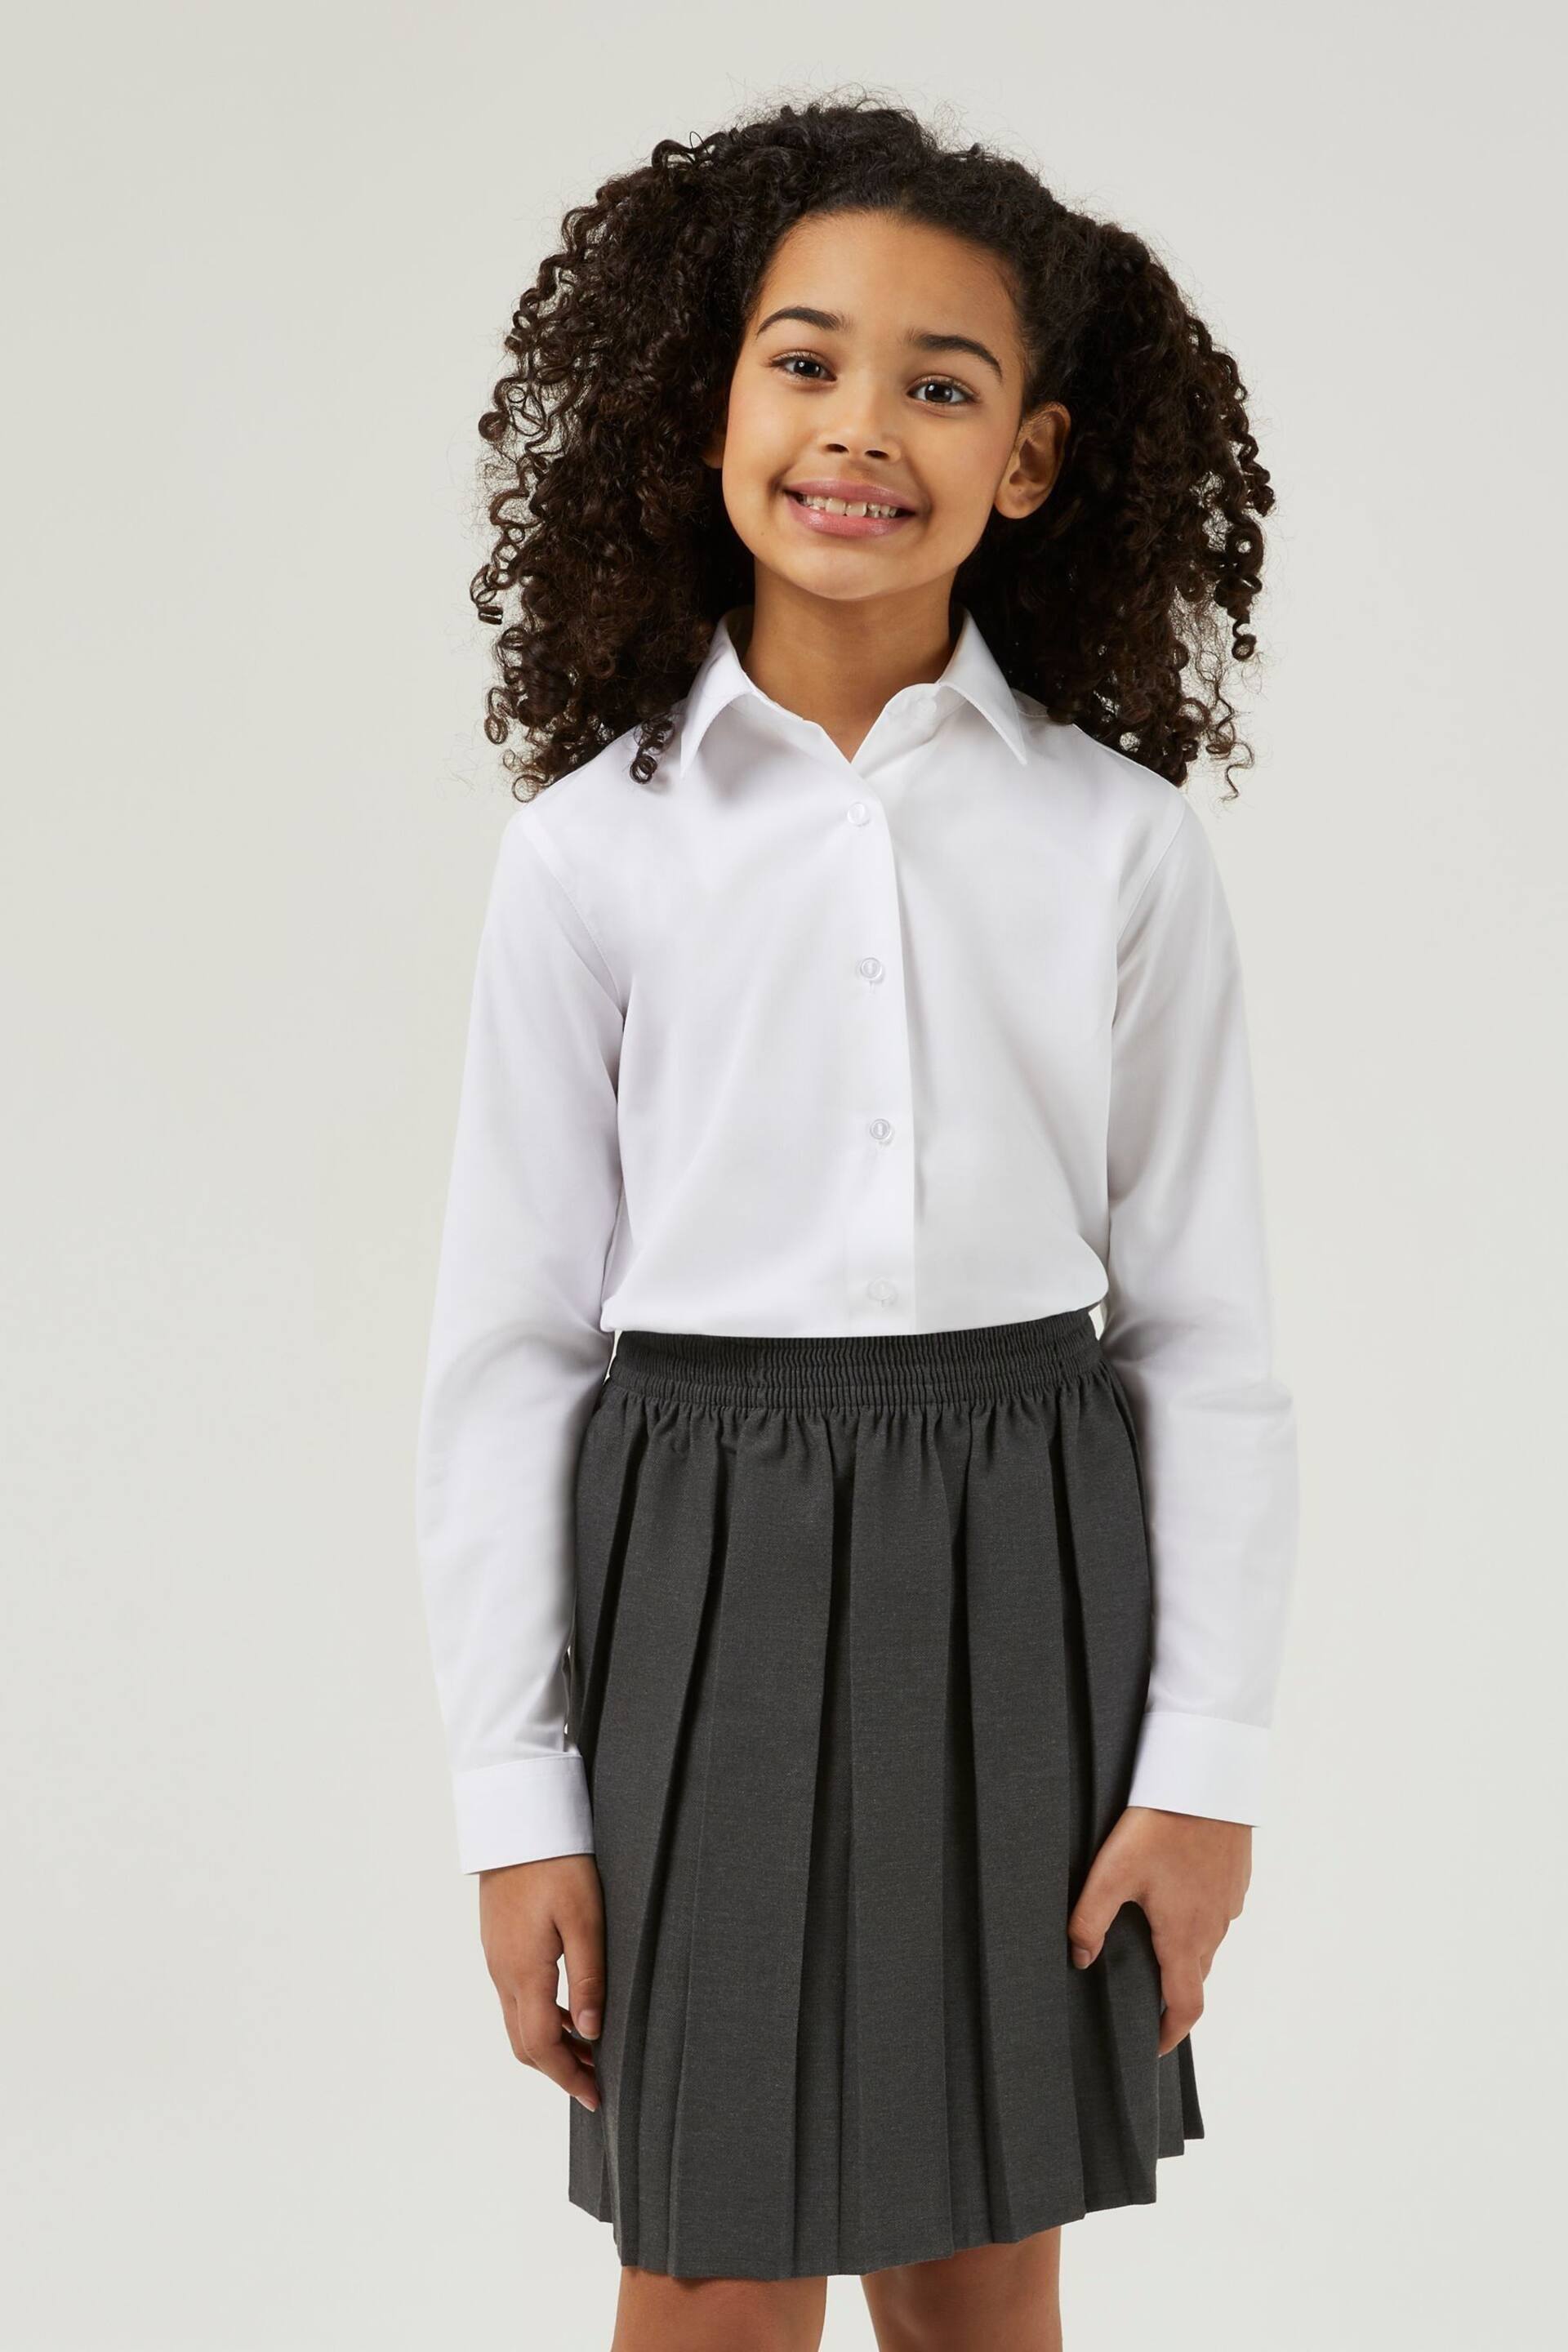 Trutex White Regular Fit Long Sleeve 3 Pack School Shirts - Image 1 of 7